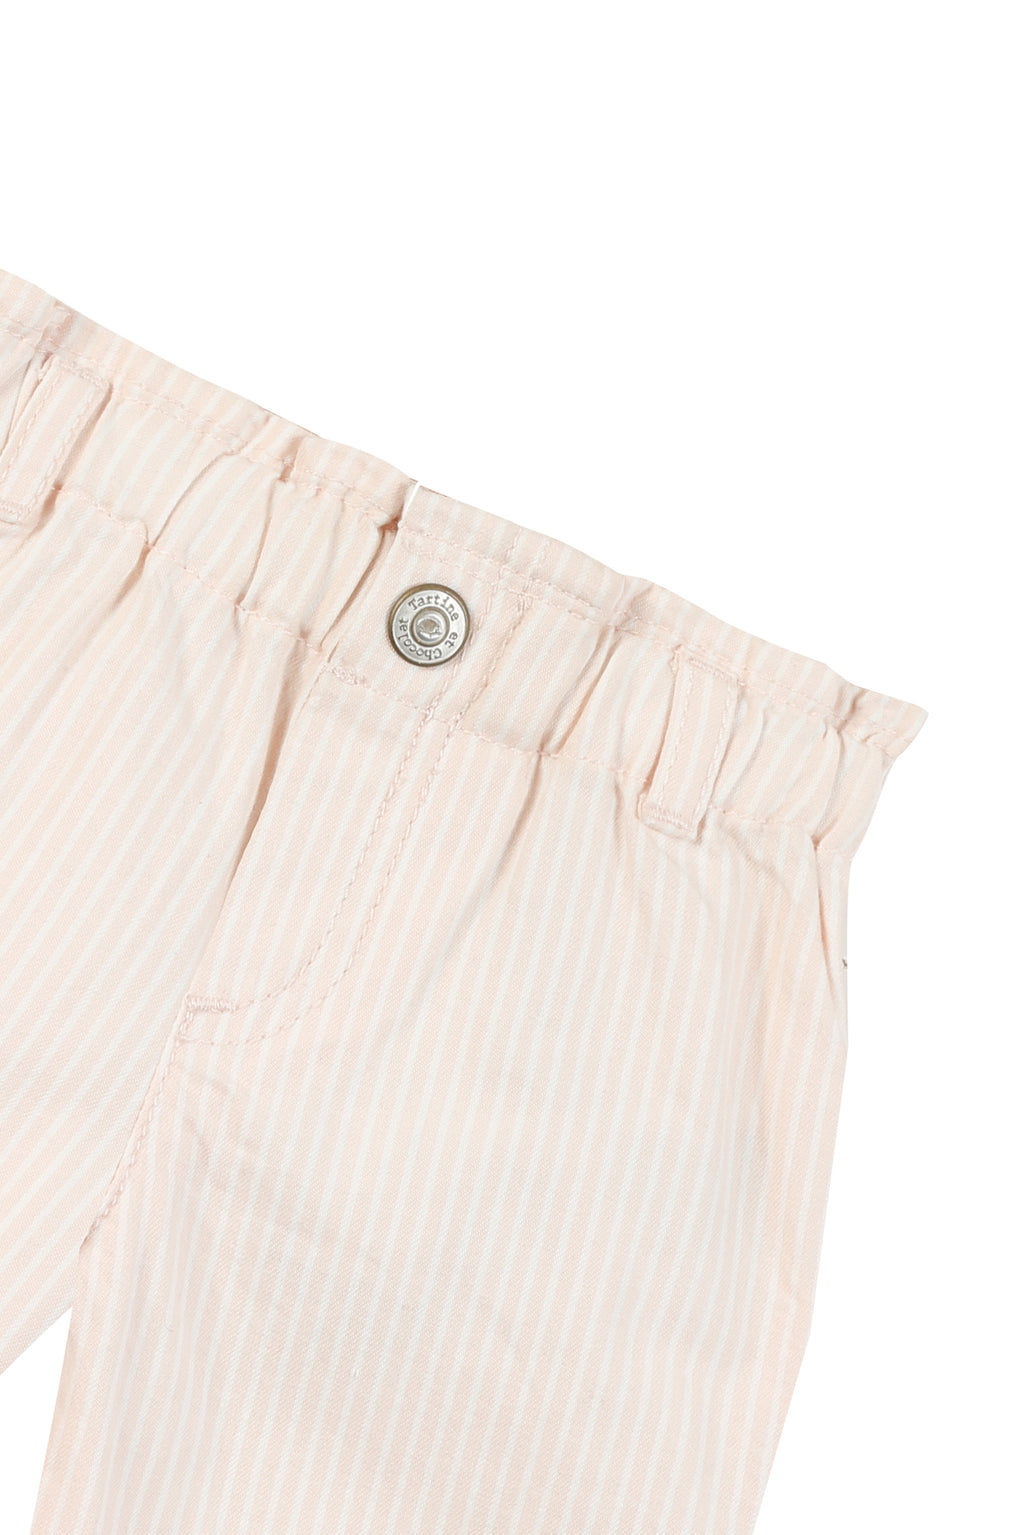 Trousers - Pale pink striped